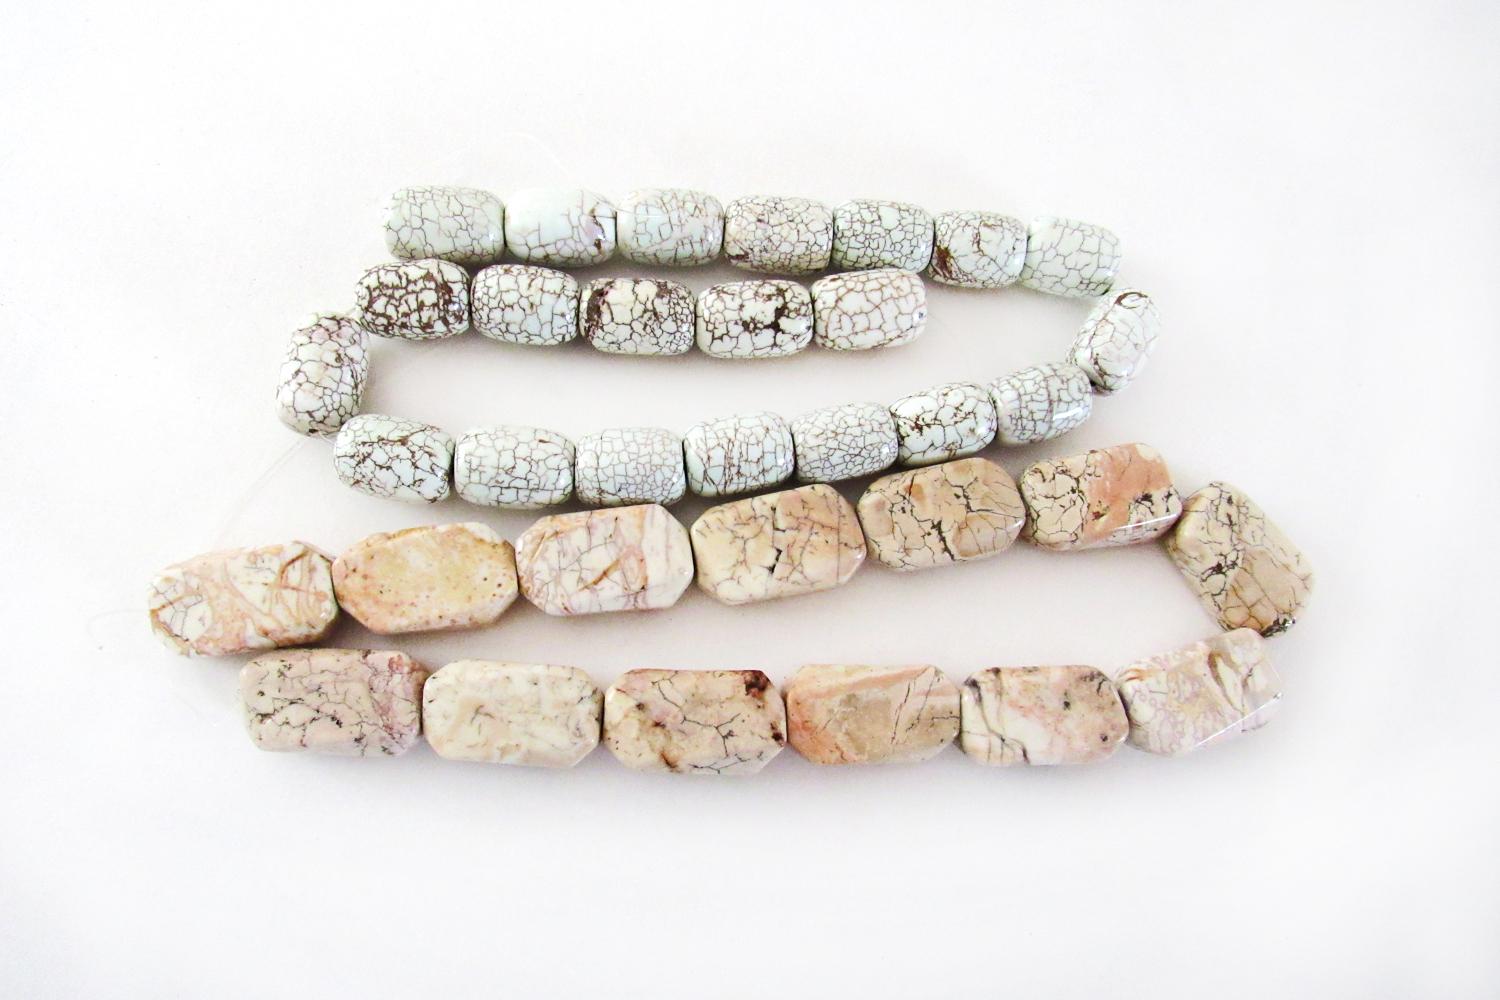 Magnesite Stone Bead Strands - Set of 2 full strands for Jewelry Making / Beading / Craft Supply - Earth Tone Colors